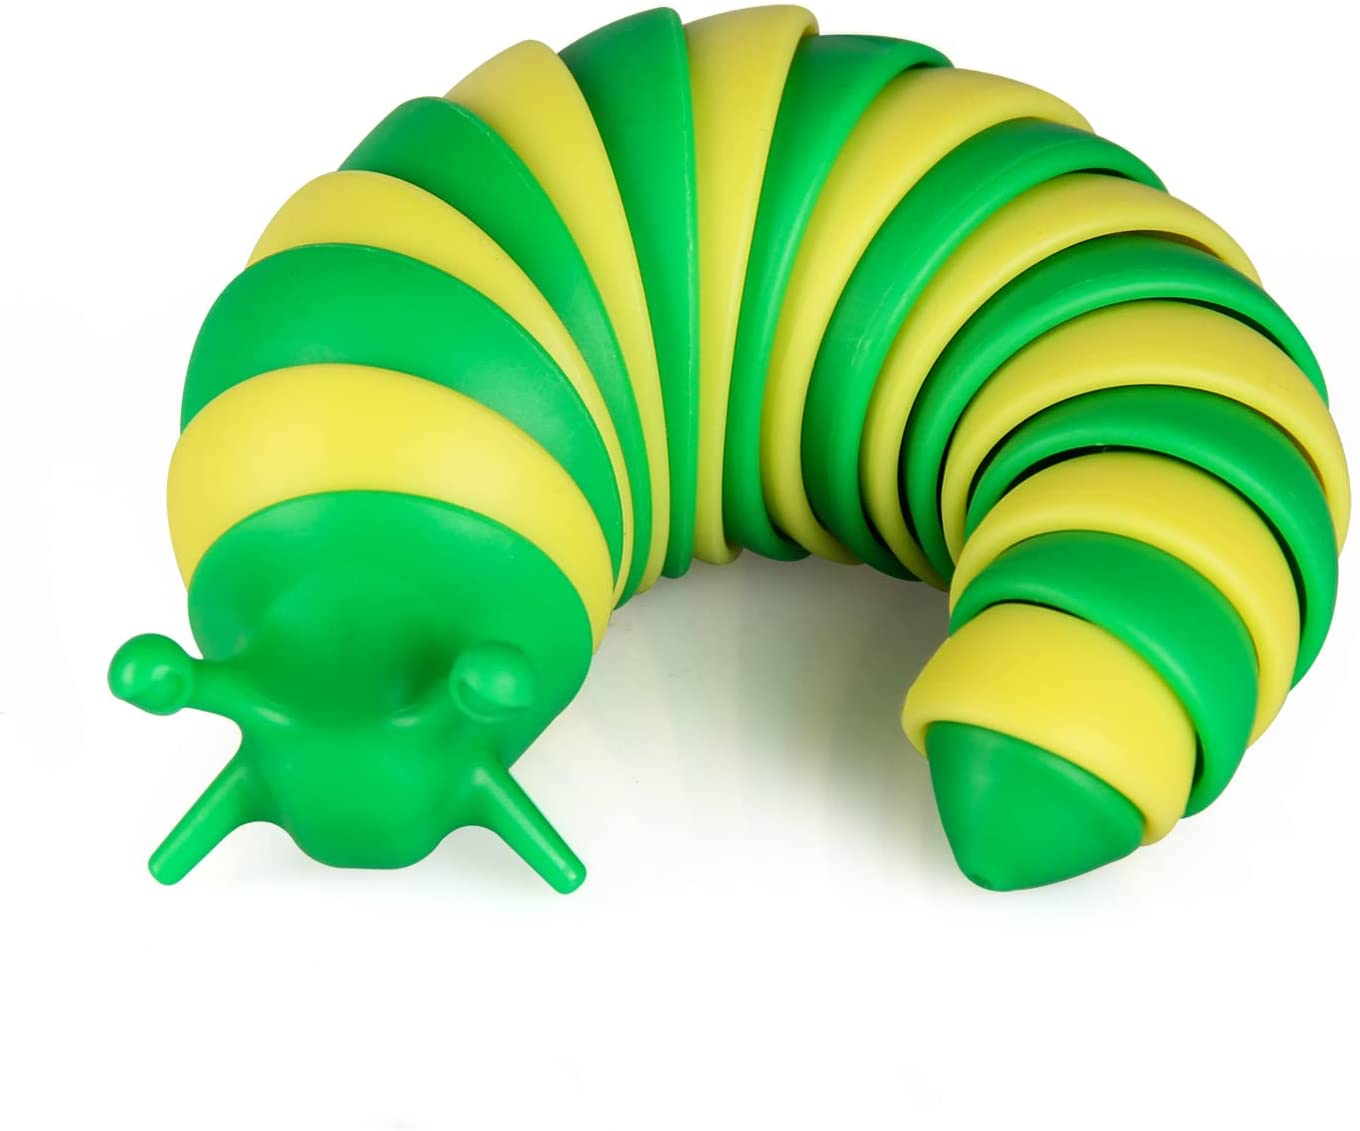 Novelty Toy Assorted Color Neon Caterpillar Toy Animal Figures Q Lot of 12 